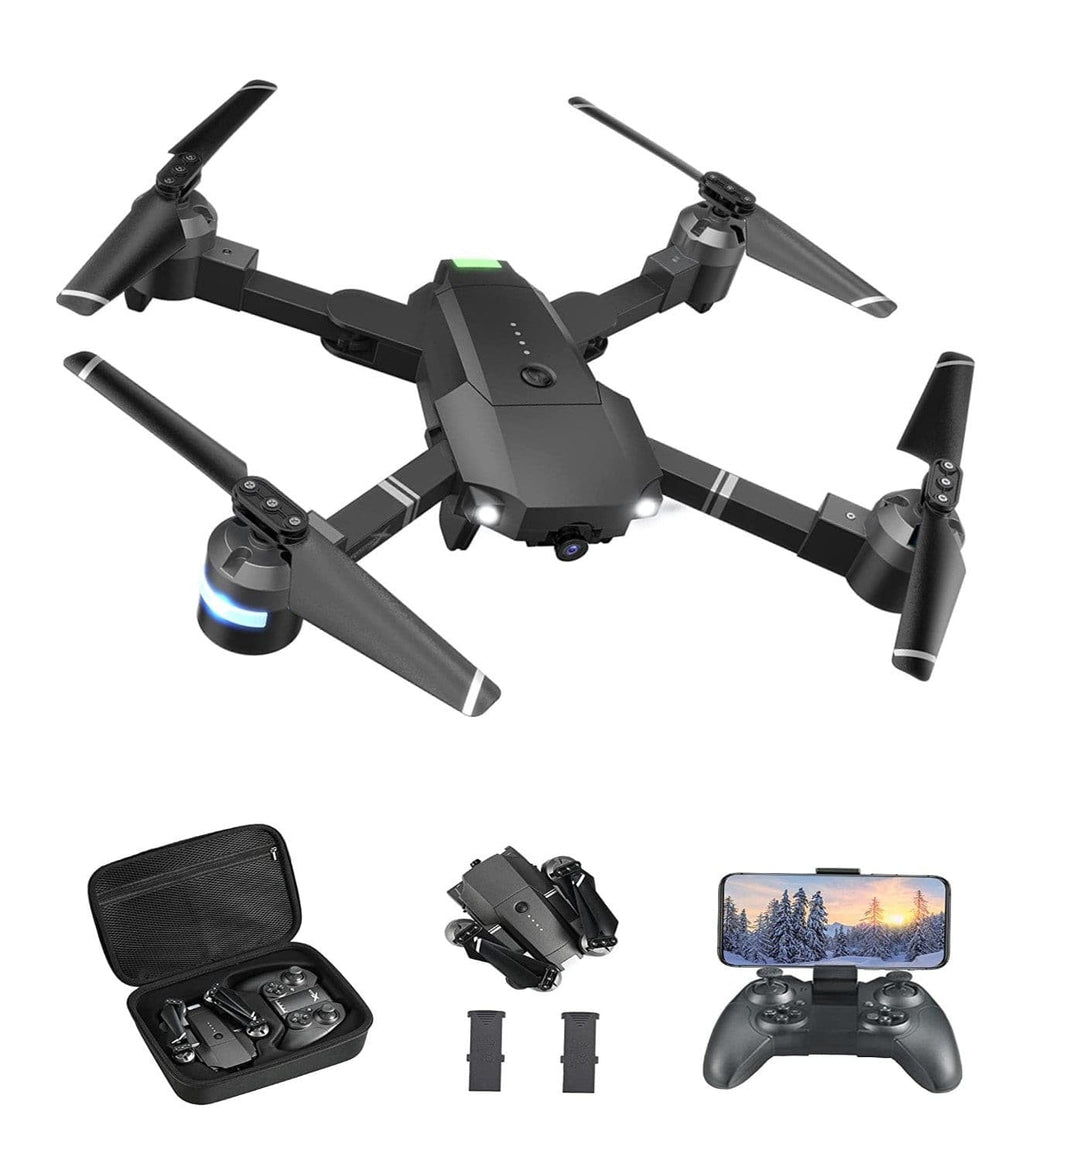 5G Compact Drone Quadcopter 4K UHD (Pro Kit With 3 X Batteries) - High-resolution drone camera - professional drone kit - quadcopter for photography - 6